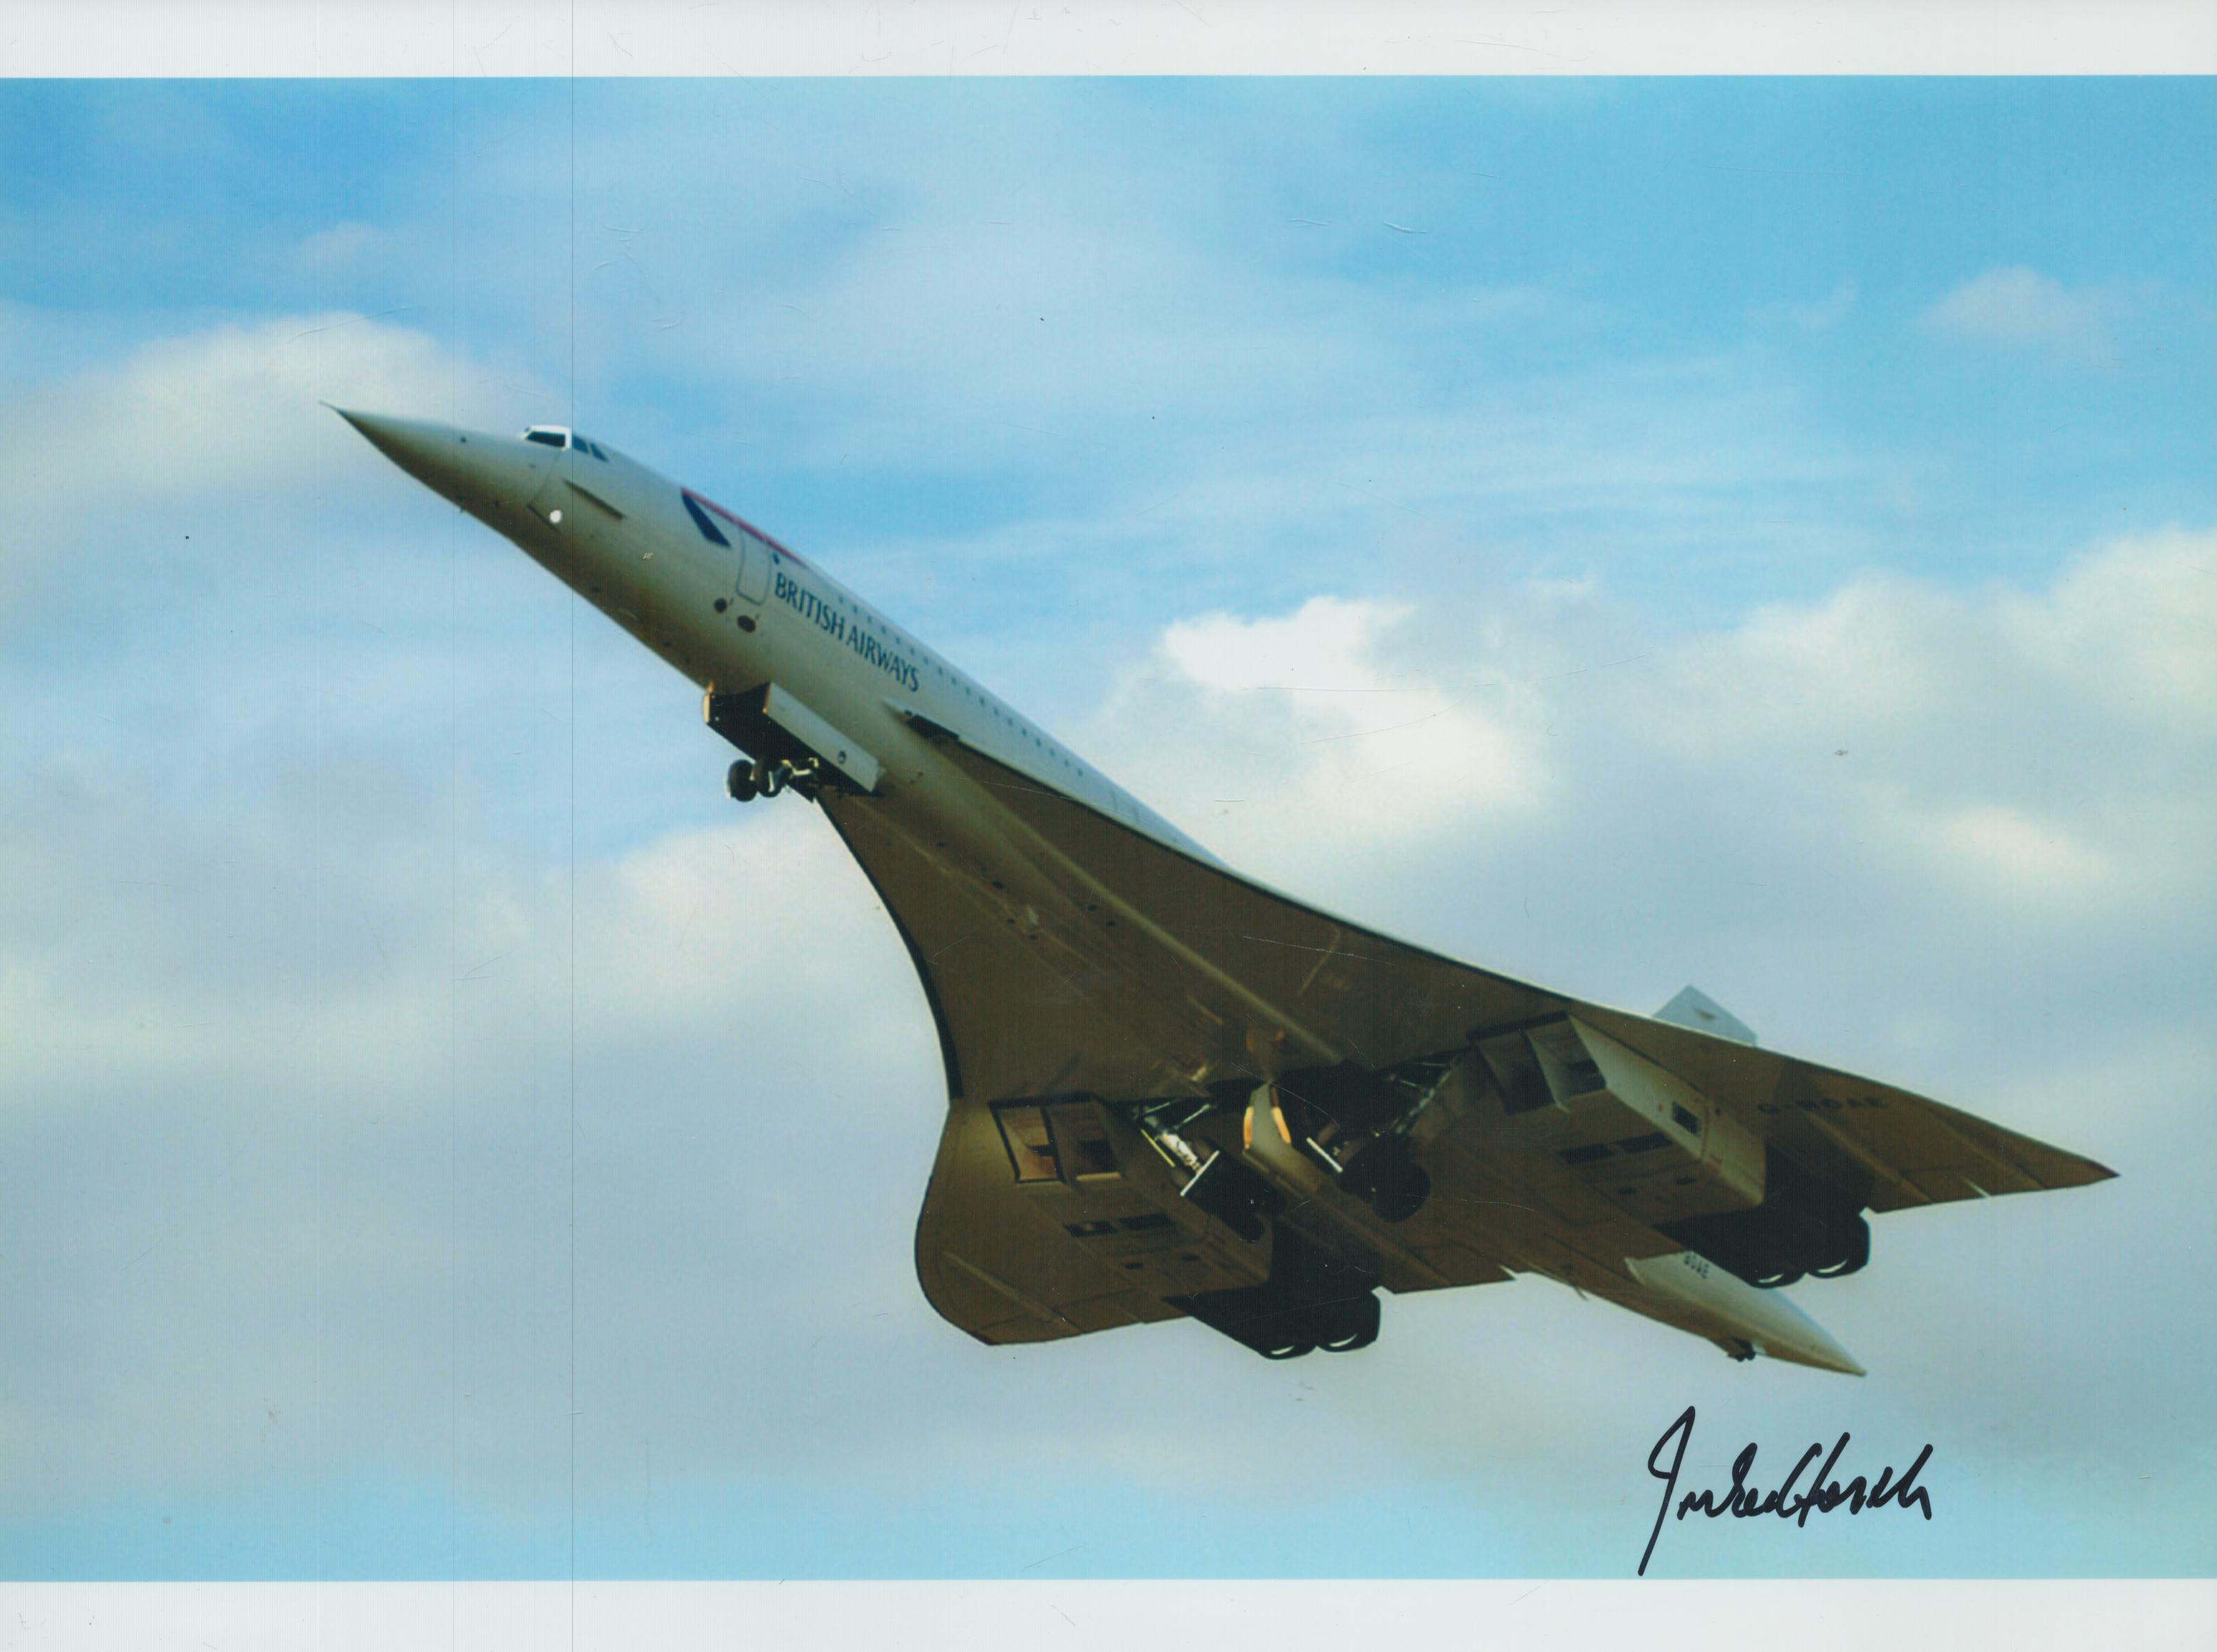 Rare Concorde Captain James Michael Bedforth D2016 signed stunning 12 x 8 inch colour in flight